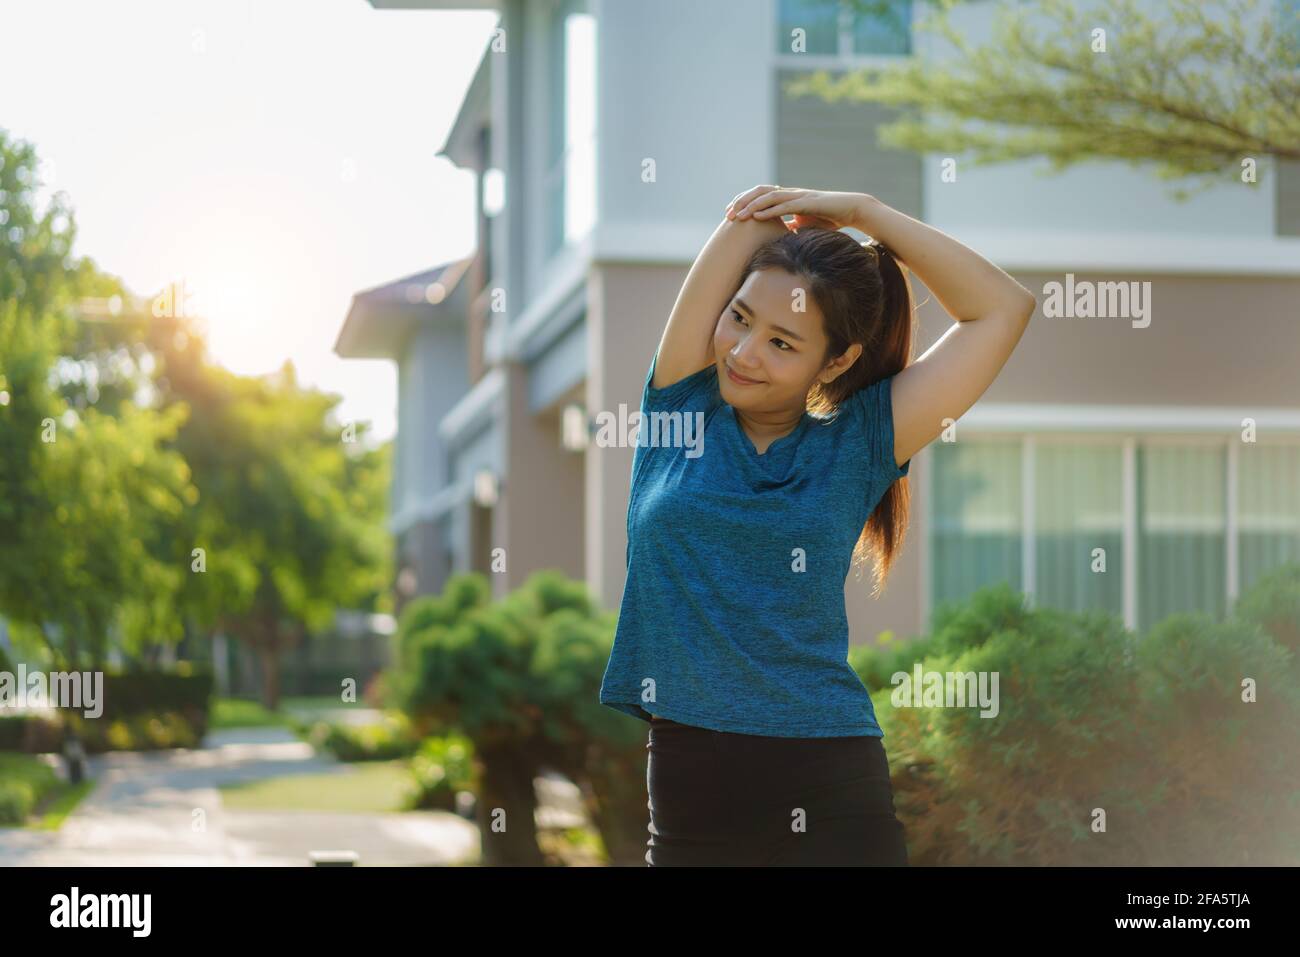 Asian woman stretching to warm up or cool down, before or after exercise, near the front door in the neighborhood for daily health and well being, bot Stock Photo